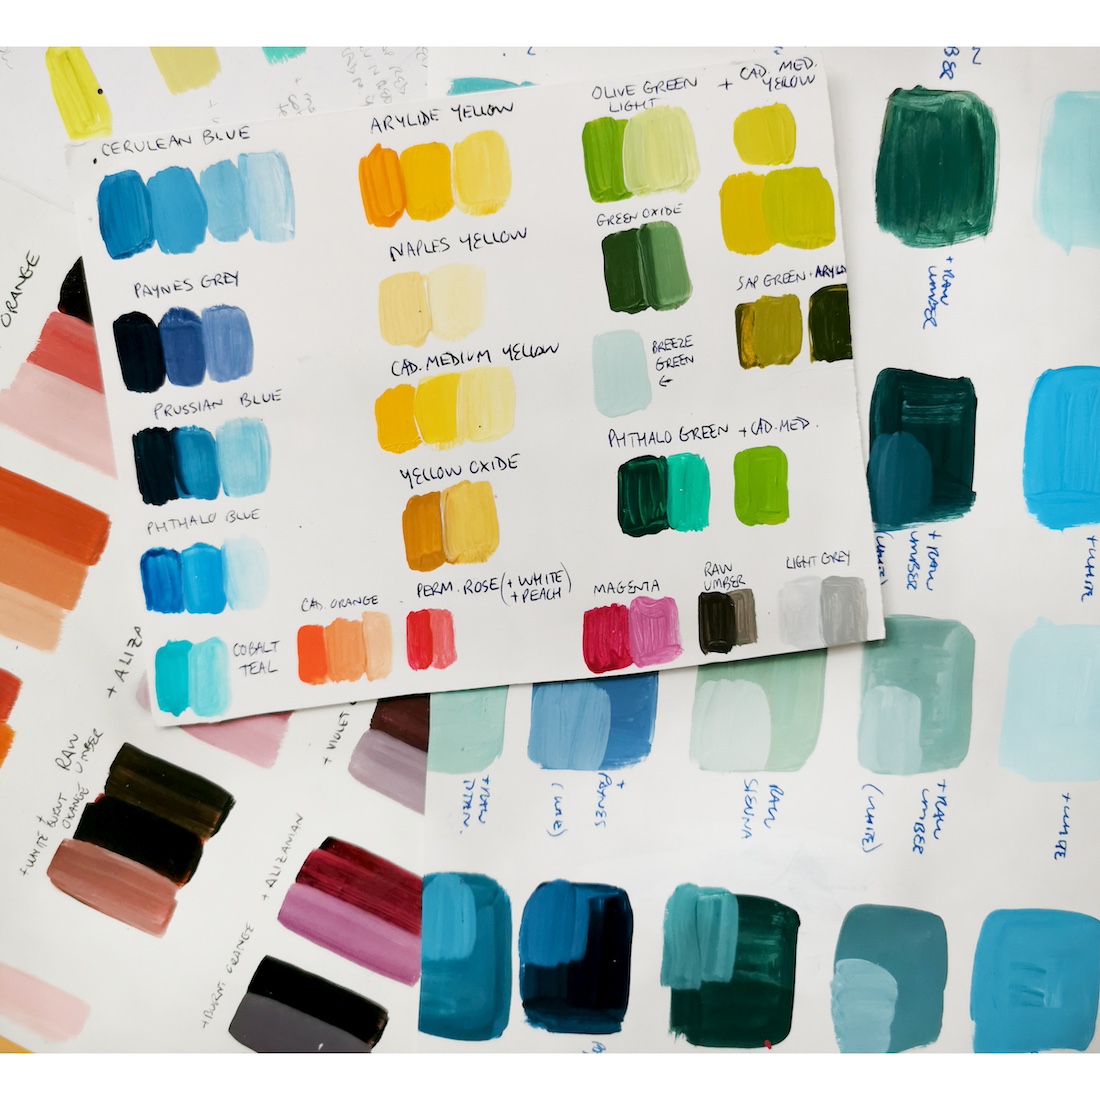 Colour paint swatches from Susannah Bee Art